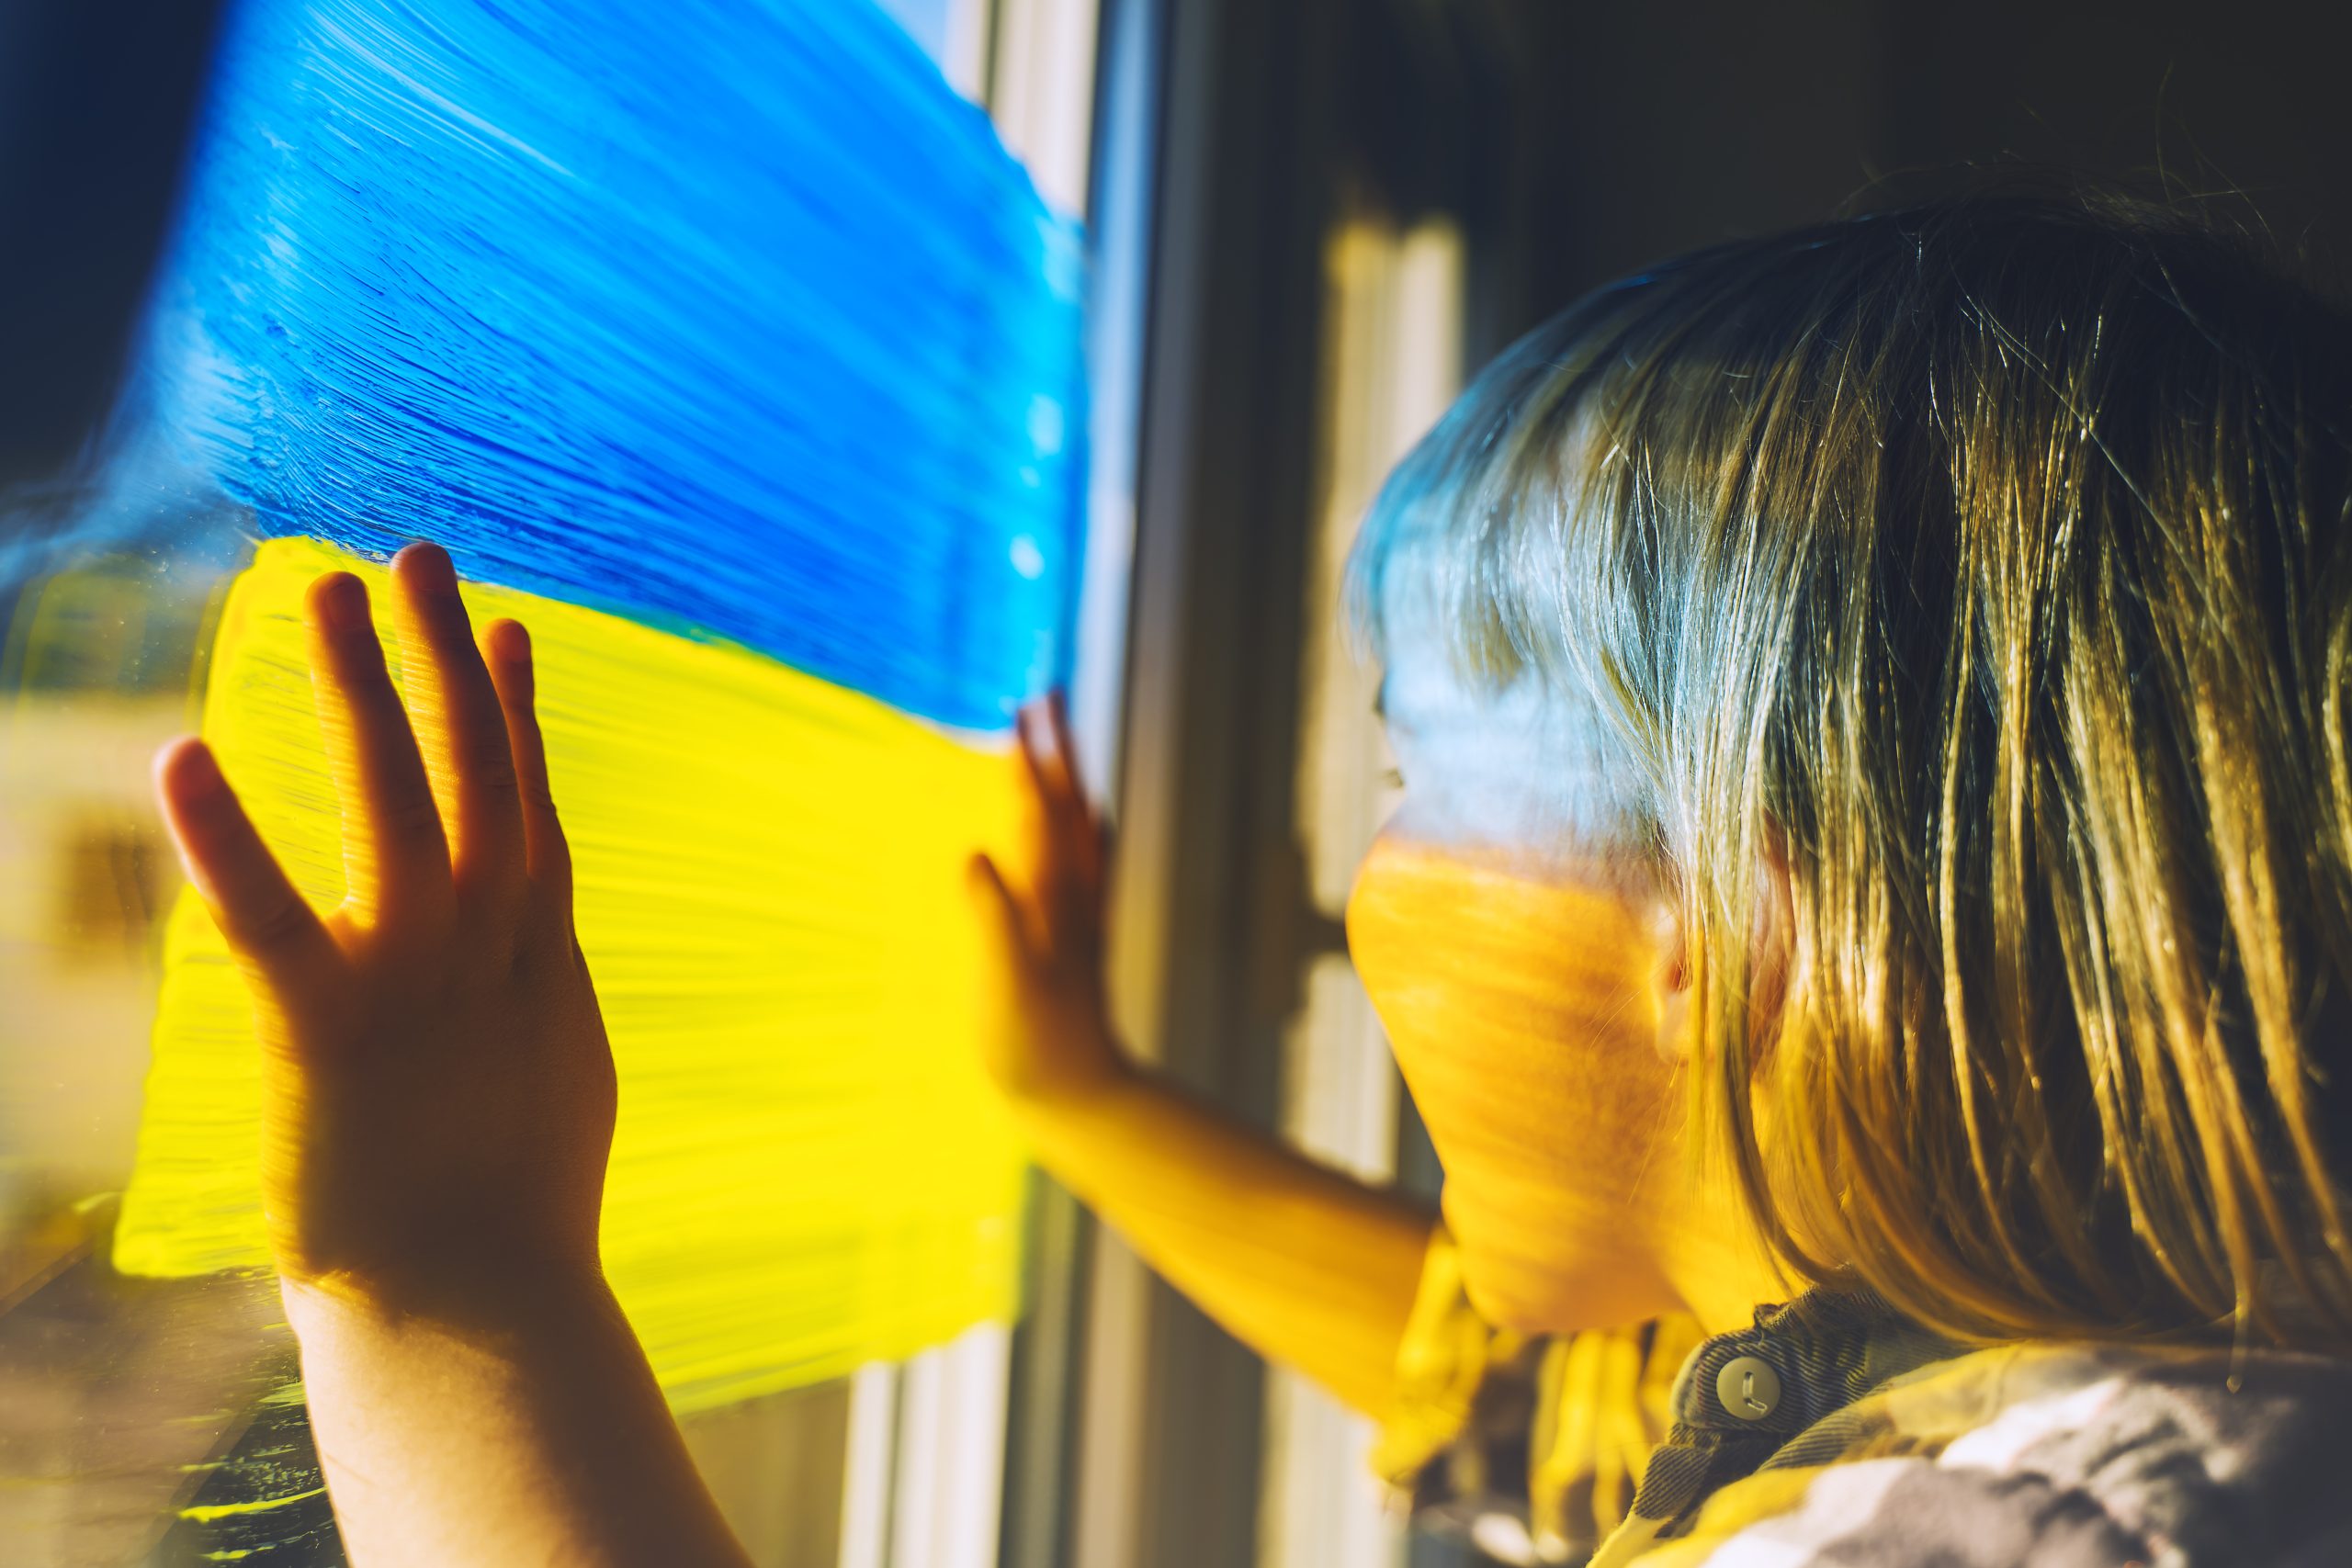 Little child with hands on yellow-blue flag image of Ukraine on window. Support Ukrainians. Concept, emotions. Color symbol image of flag of Ukraine on glass with paints.